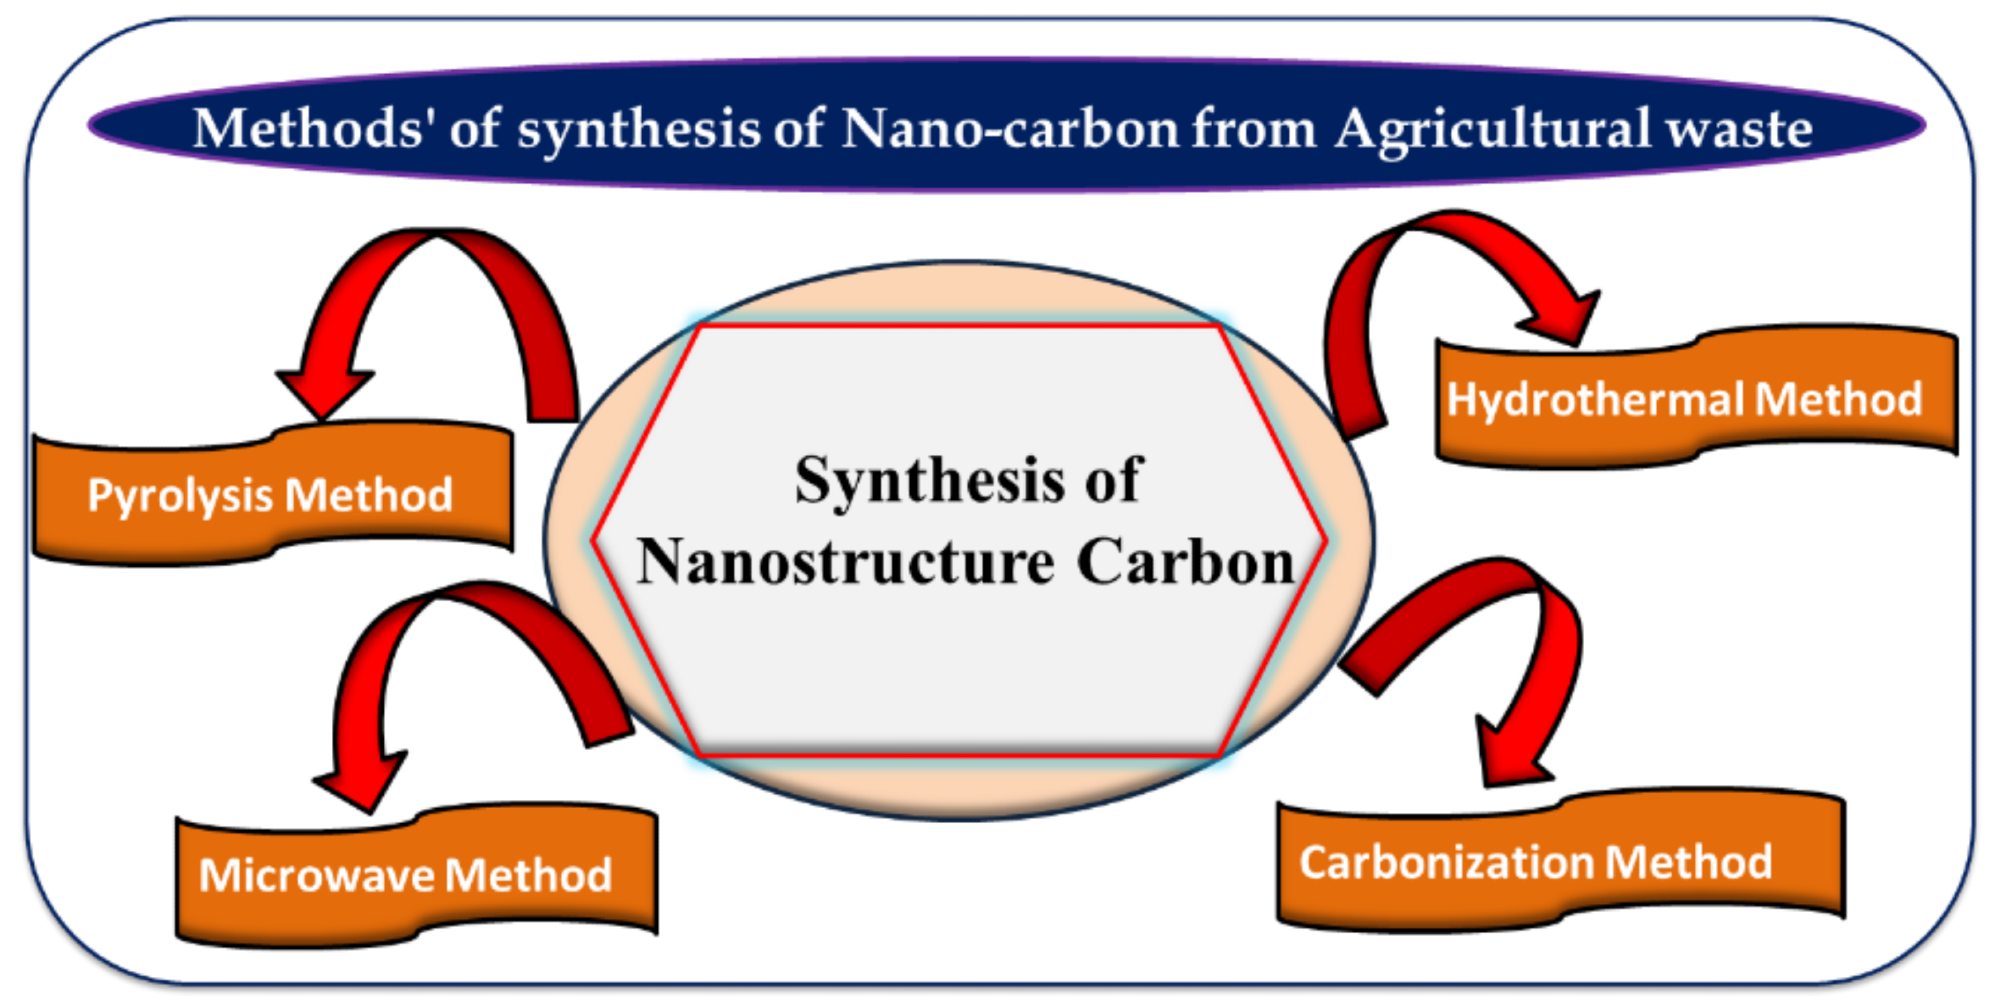 Various methods such as pyrolysis, microwave, hydrothermal, and carbonization for nanocarbon synthesis from agricultural waste